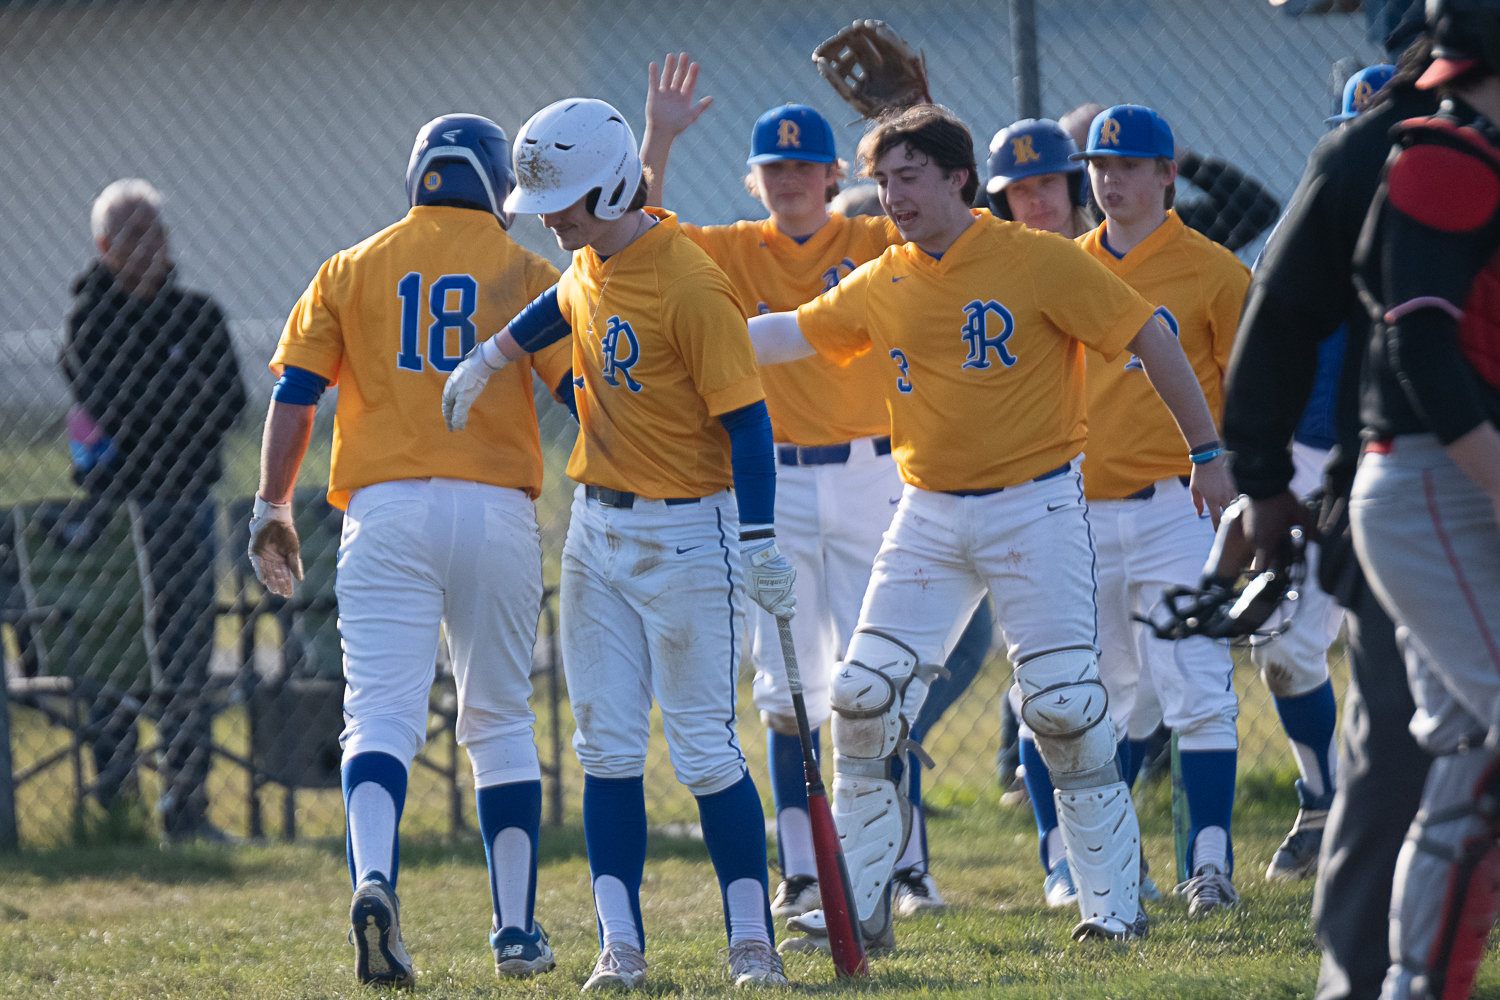 The Rochester dugout welcomes back Mason Armstrong (18) after he scored a run in the bottom of the second inning of the Warriors' 15-6 win over R.A. Long on March 16.